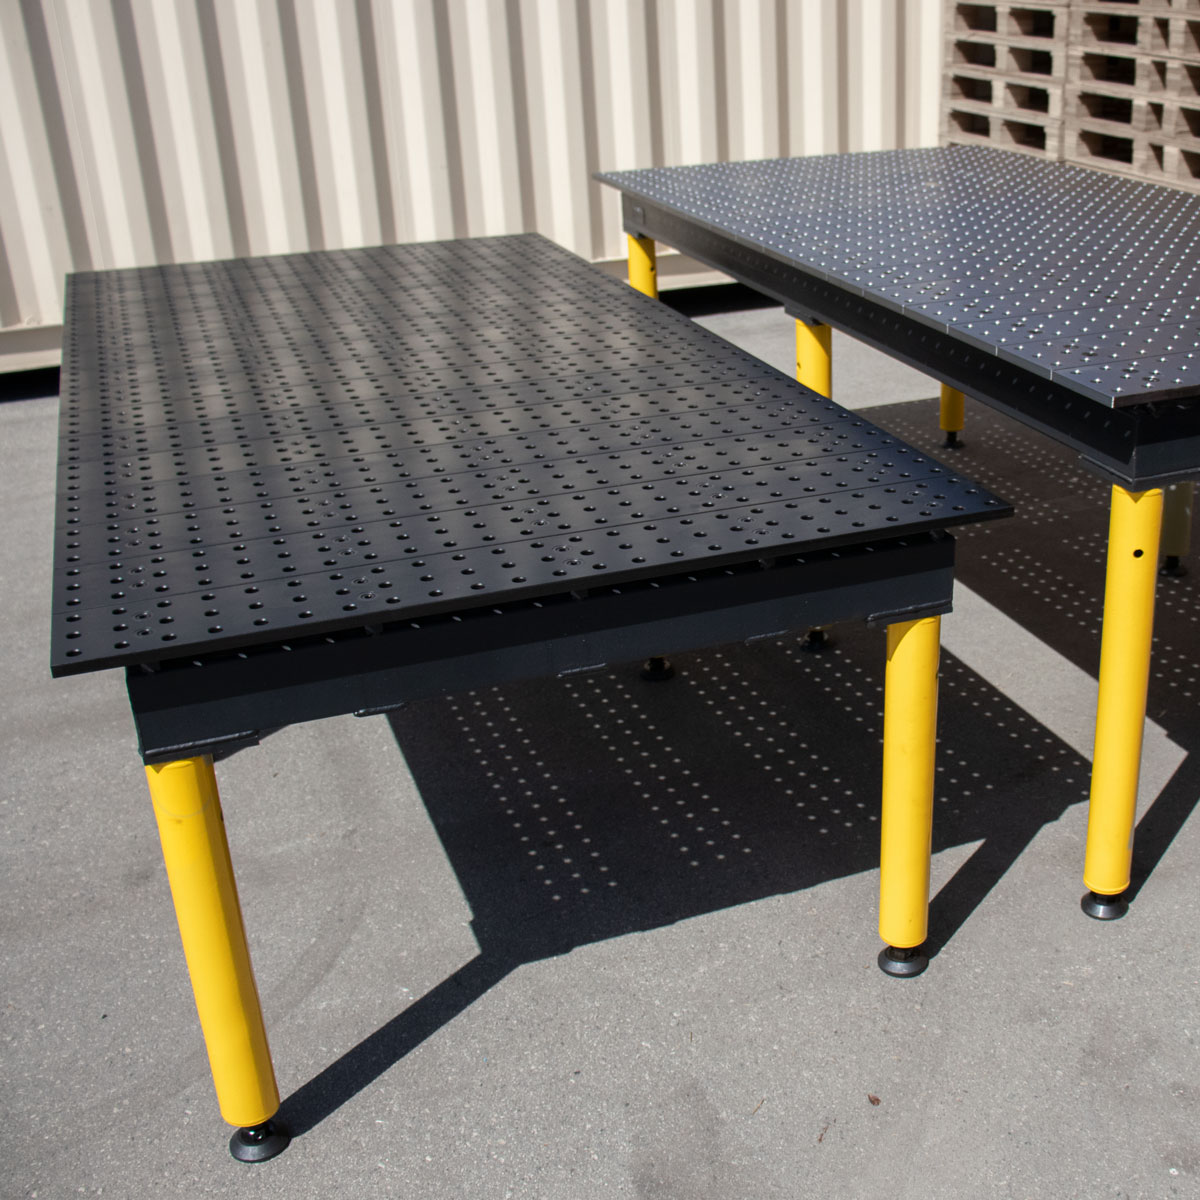 nitrided and standard max tables side by side